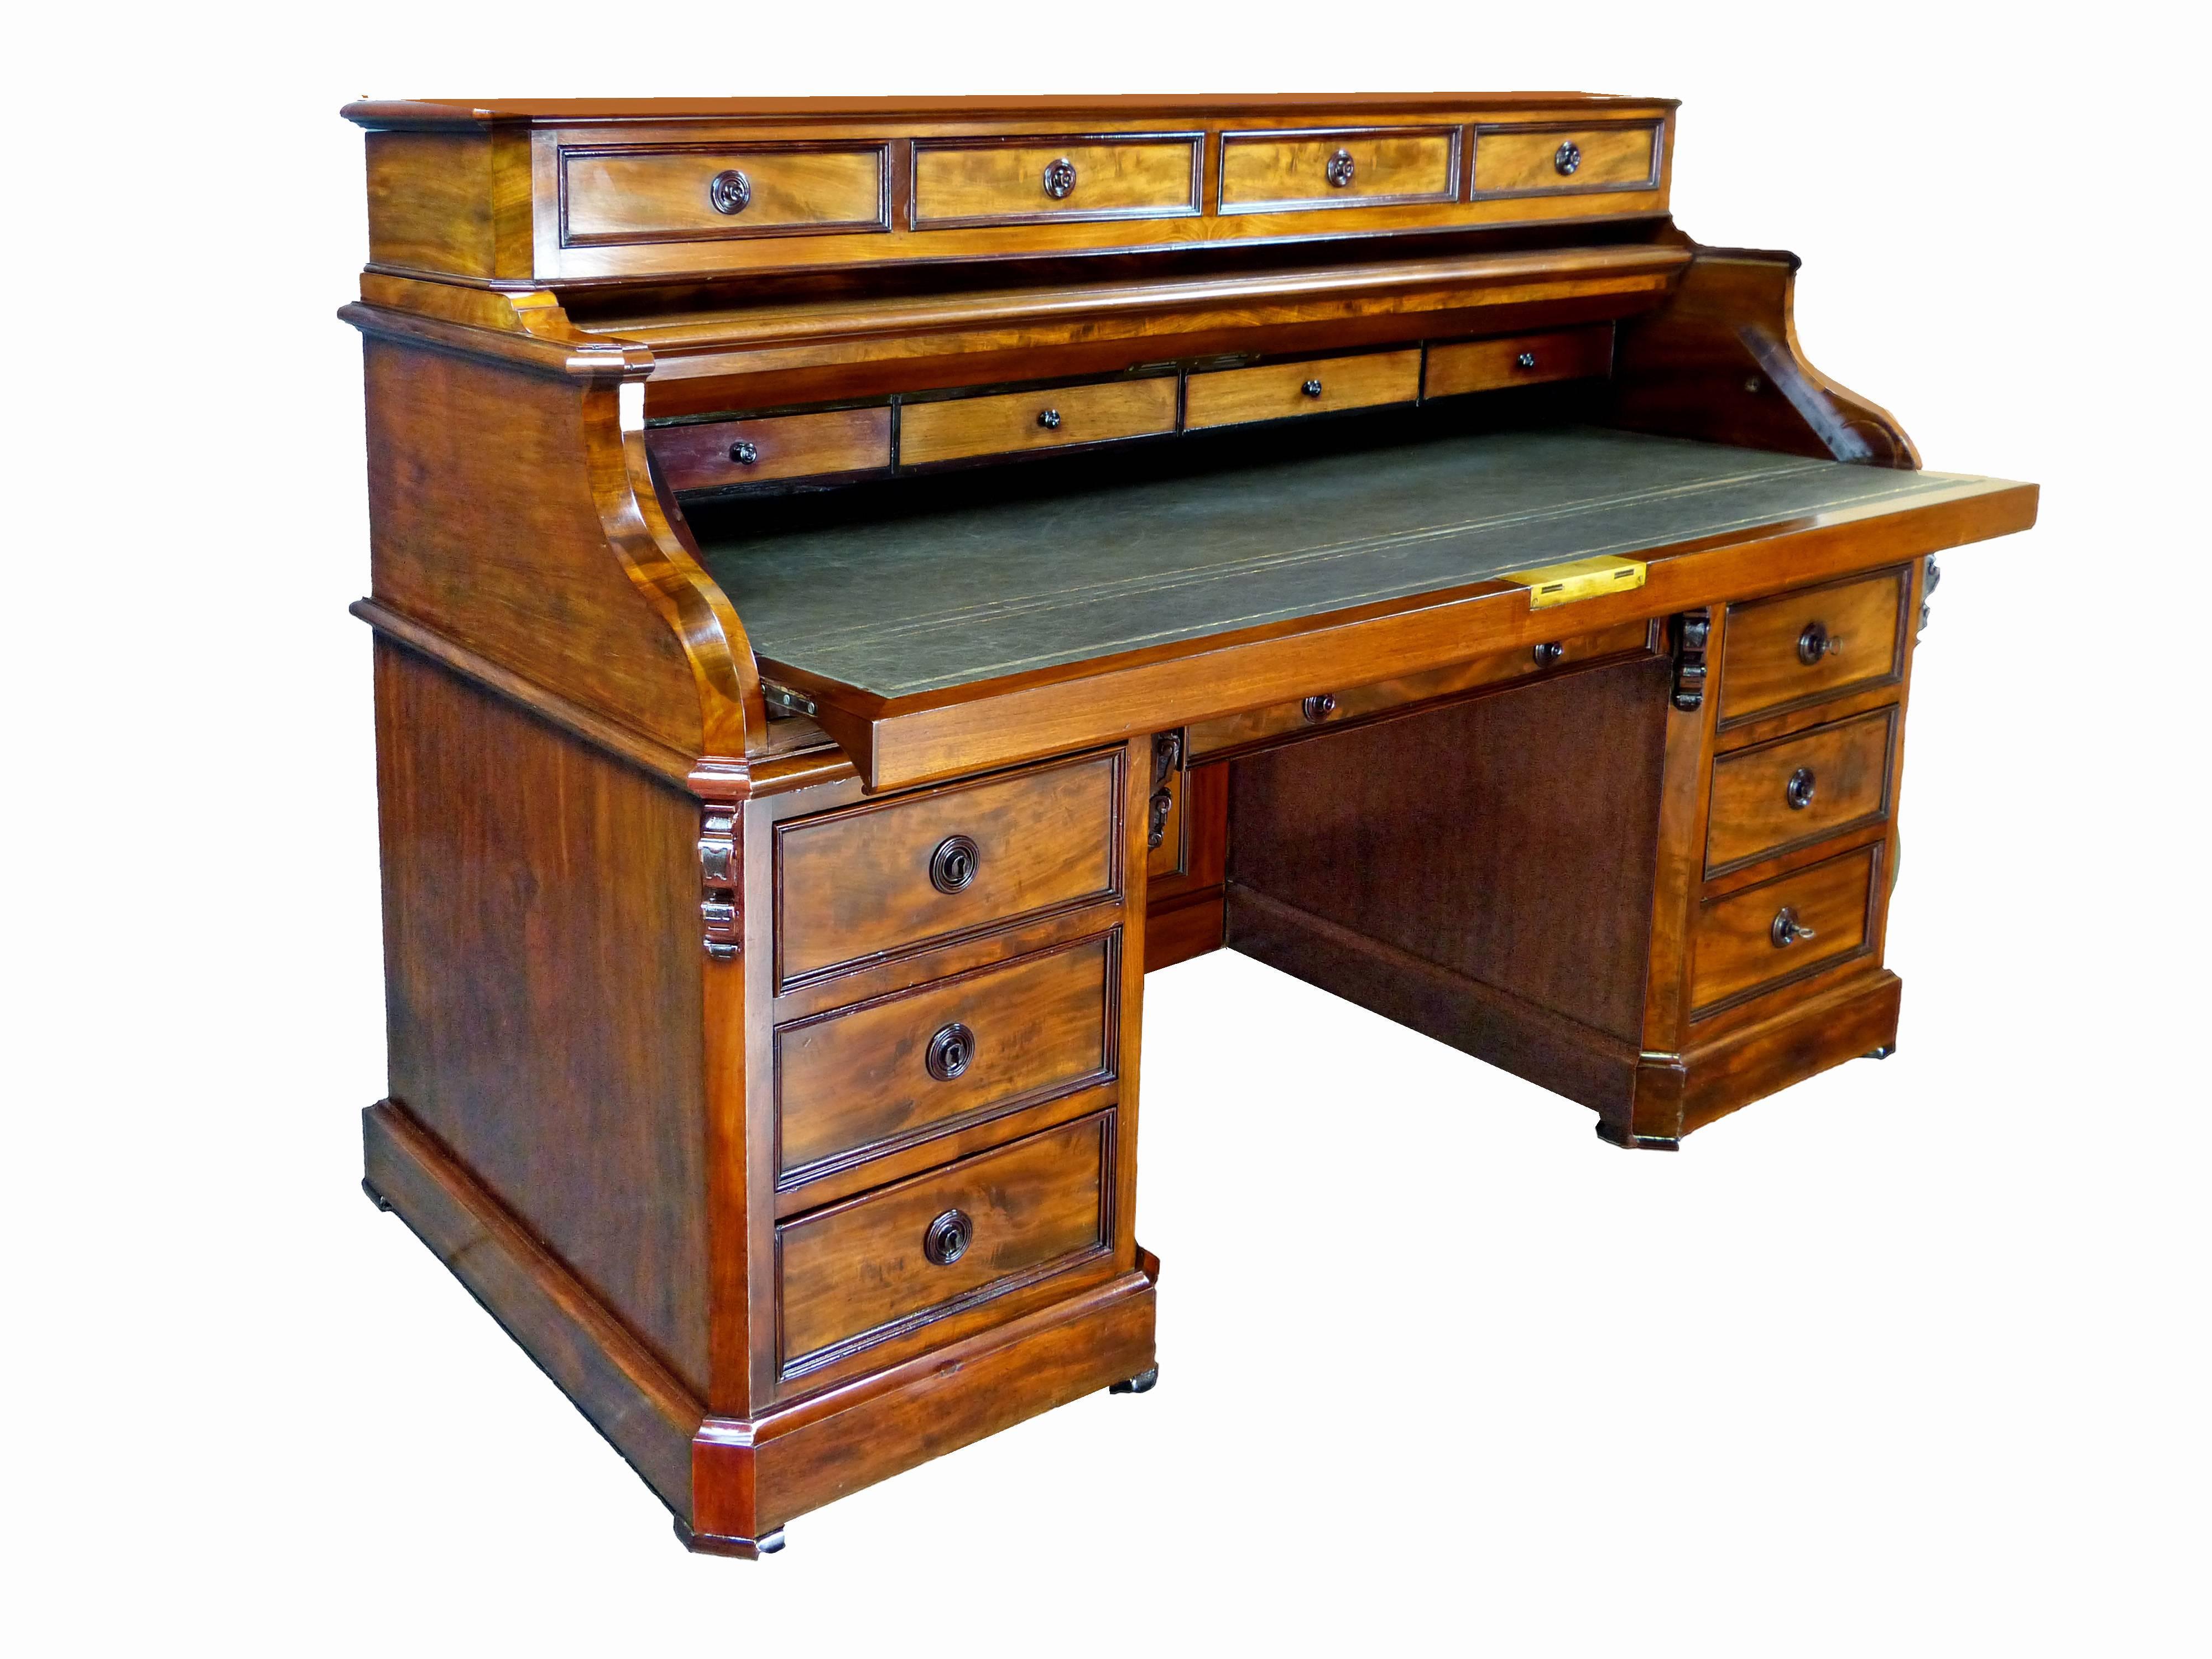 Important and exceptional quality large 4-sided French bureau of finely figured mahogany exterior and solid oak interior. Unique system of double action piano top that once the fall front is lowered the upper part also retreats inwards to reveal a